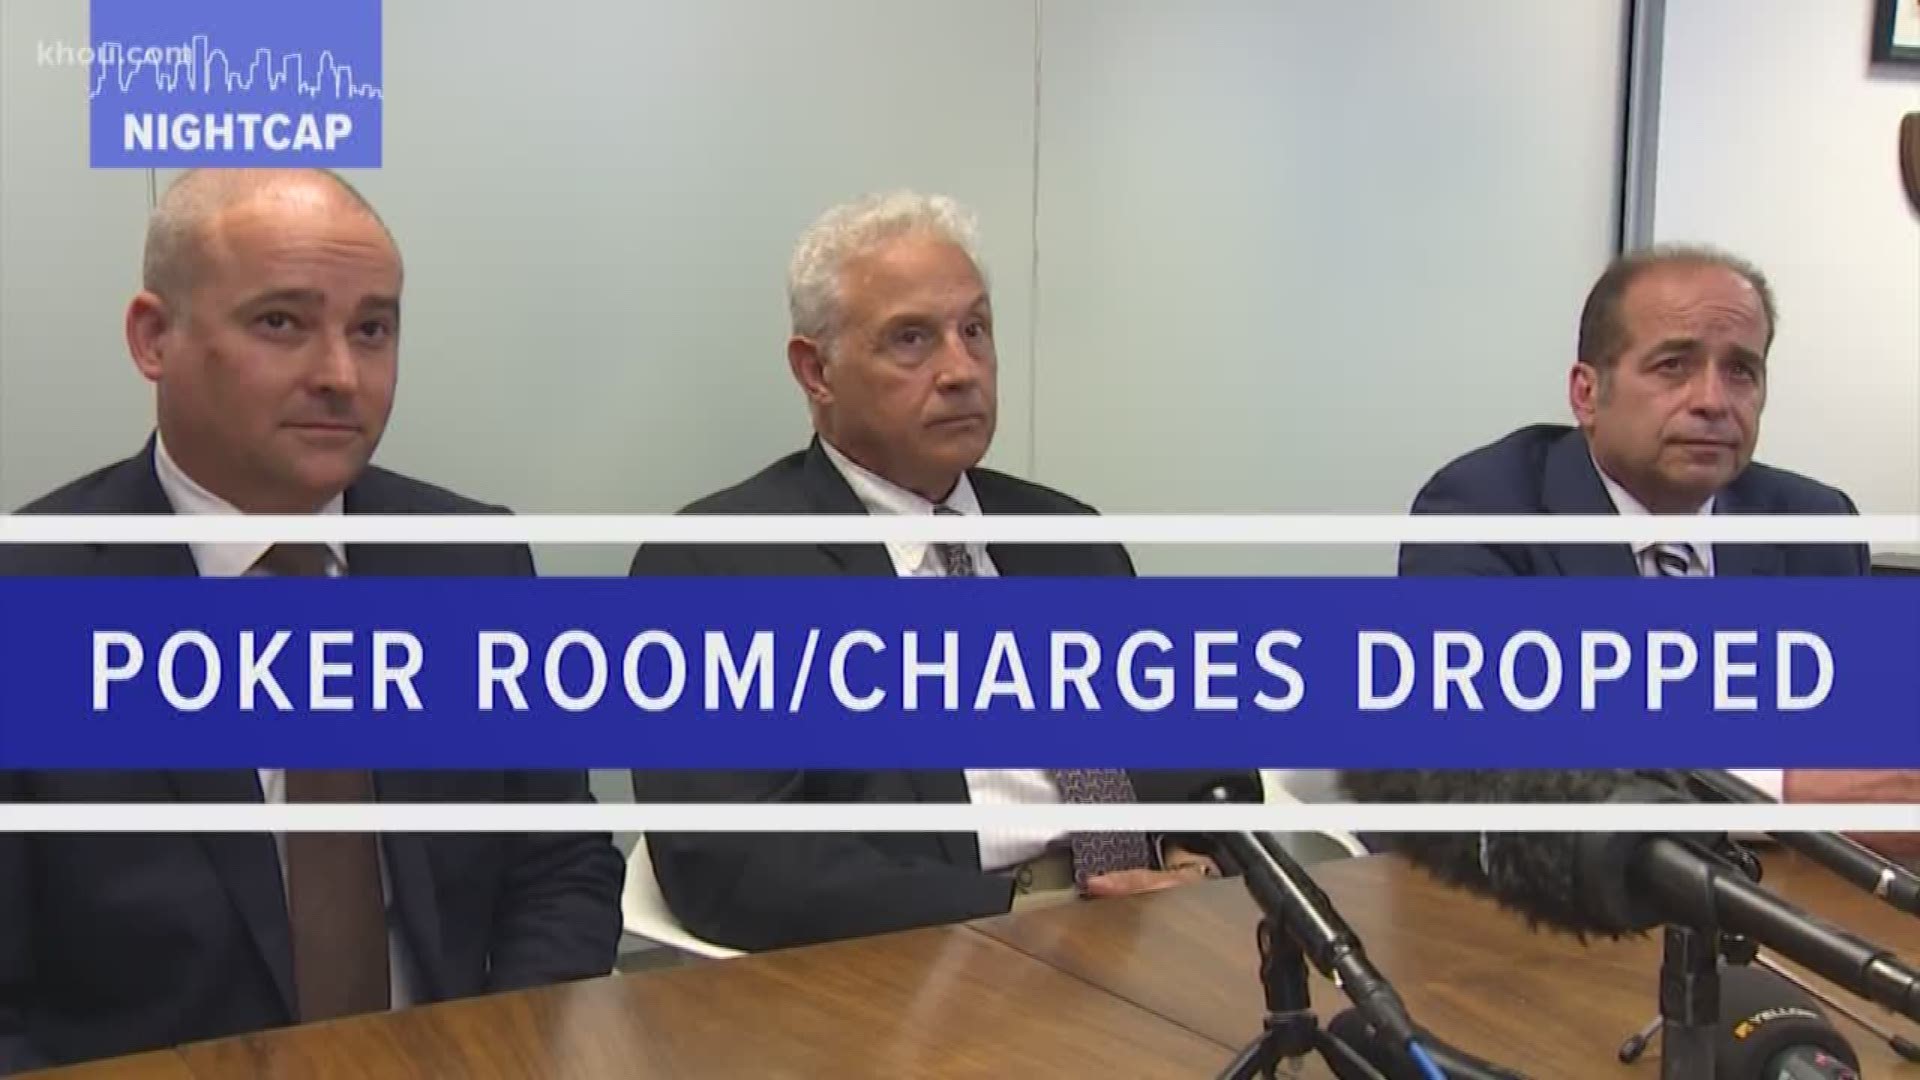 It's vindication for the owners of a game room that was raided in May. The district attorney dropped money laundering charges against them and it's all because of a possible conflict of interest in the investigation. That story leads this edition of the 90-second nightcap.